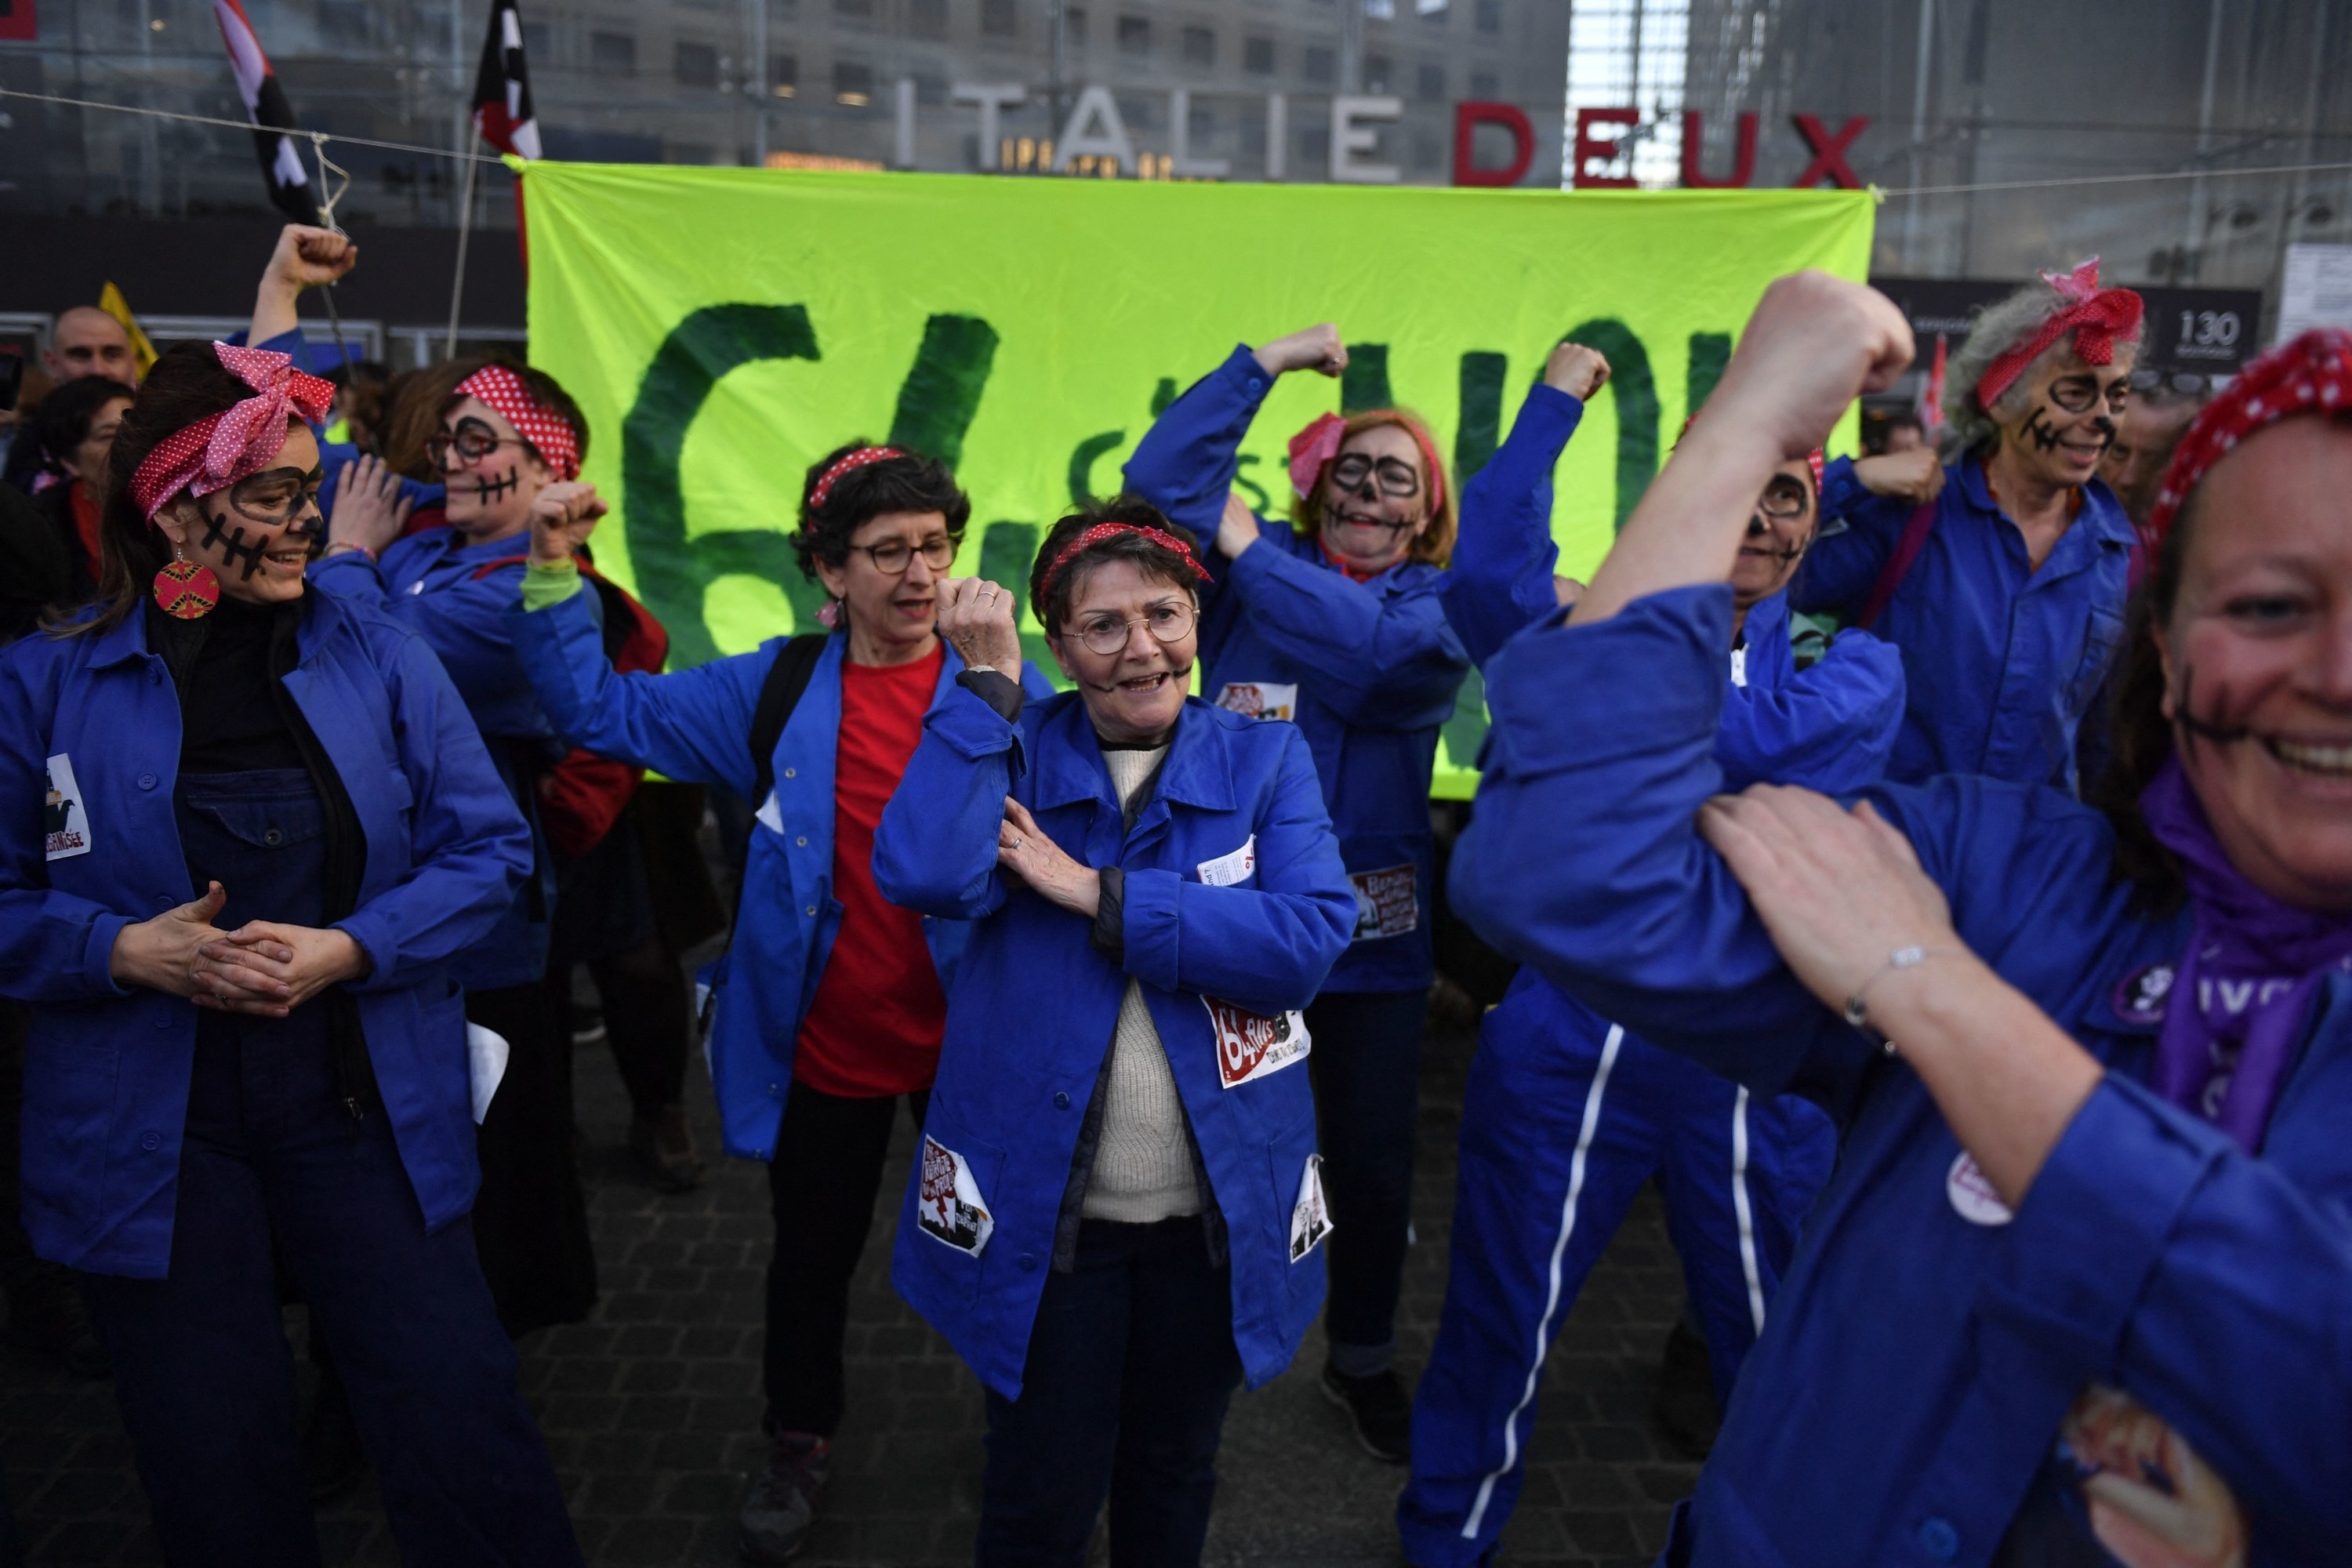 Feminist collective members wear jackets with patches and bandanas tied around their heads hold their arms up in the &quot;Rosie the Riveter&quot; pose with their faces painted like skeletons